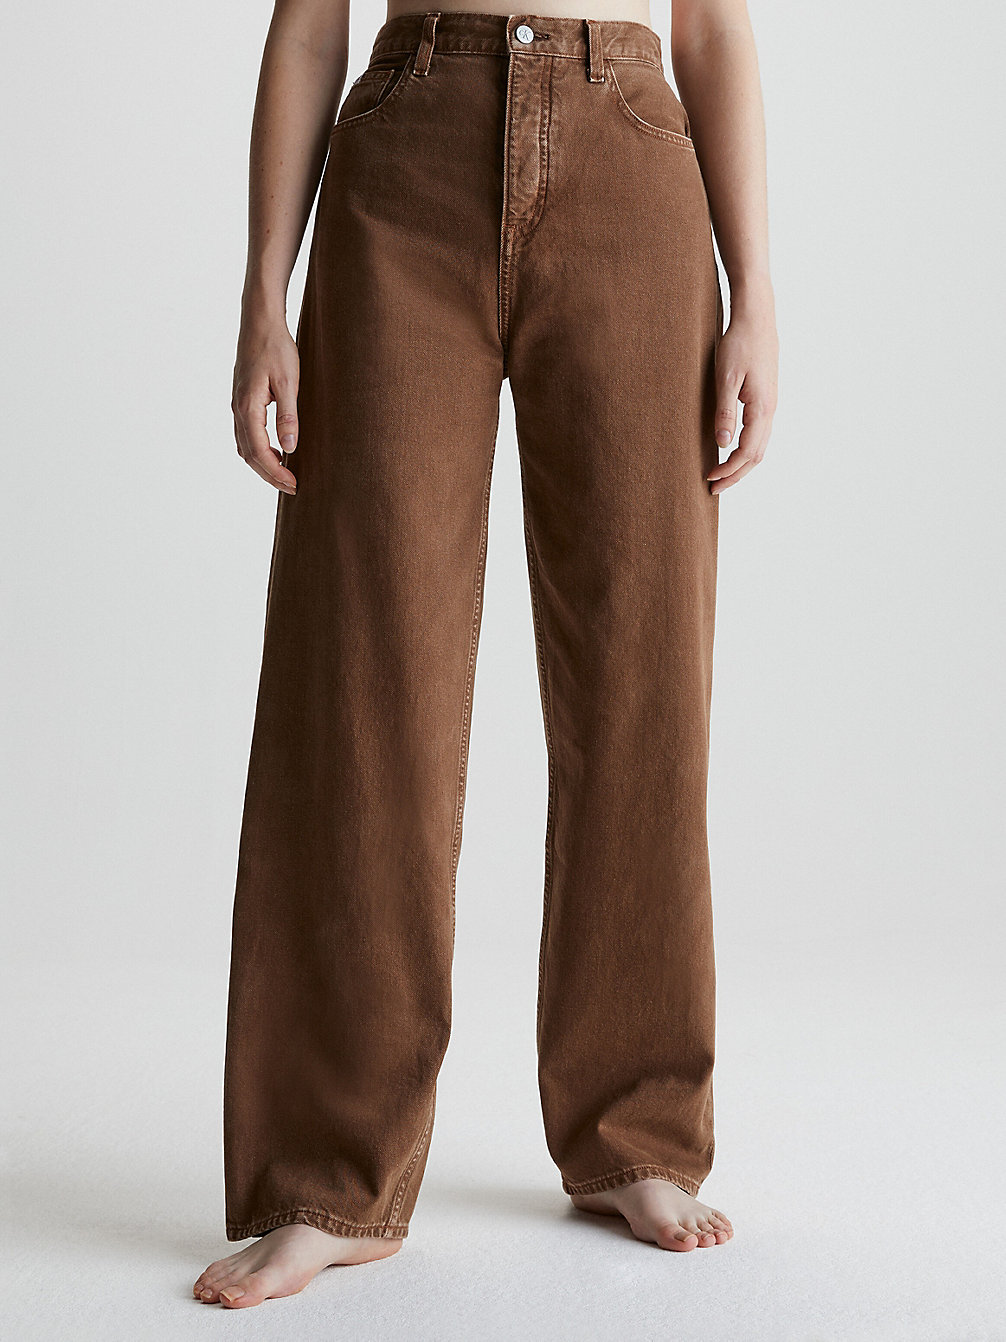 High Rise Relaxed Jeans > BISON > undefined mujer > Calvin Klein